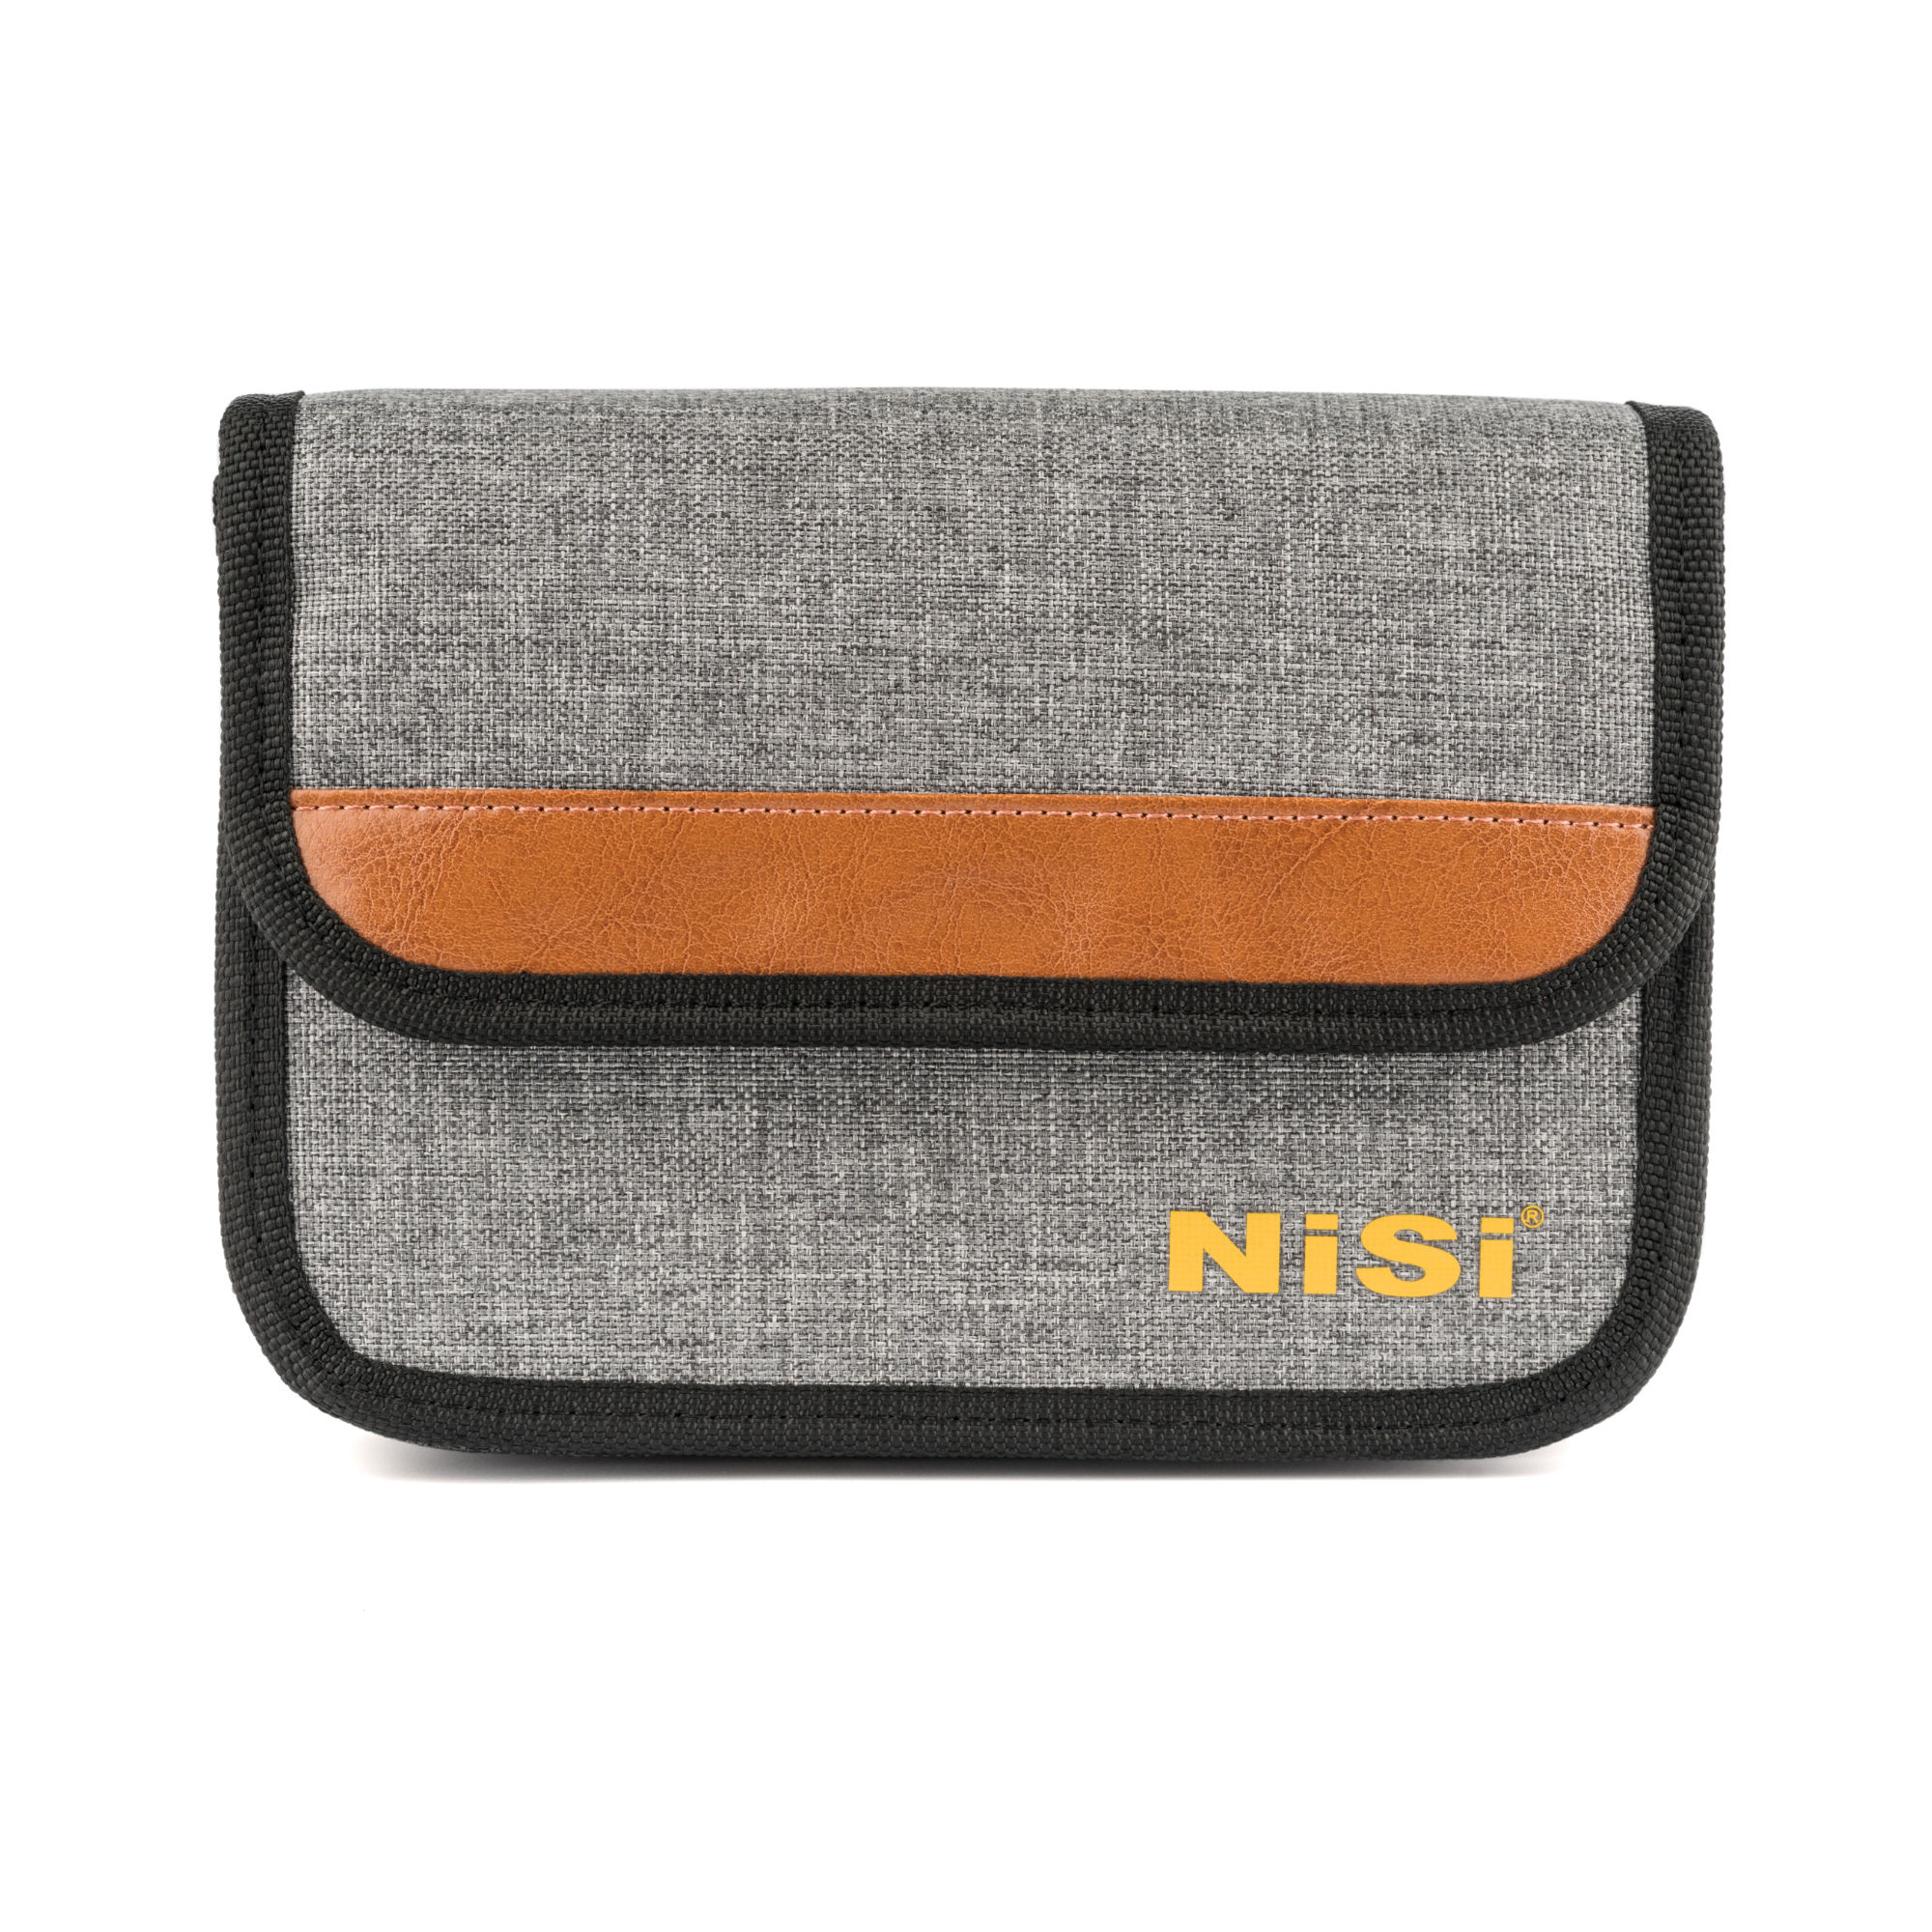 Shop Filter Pouches and Cases | NiSi Optics USA